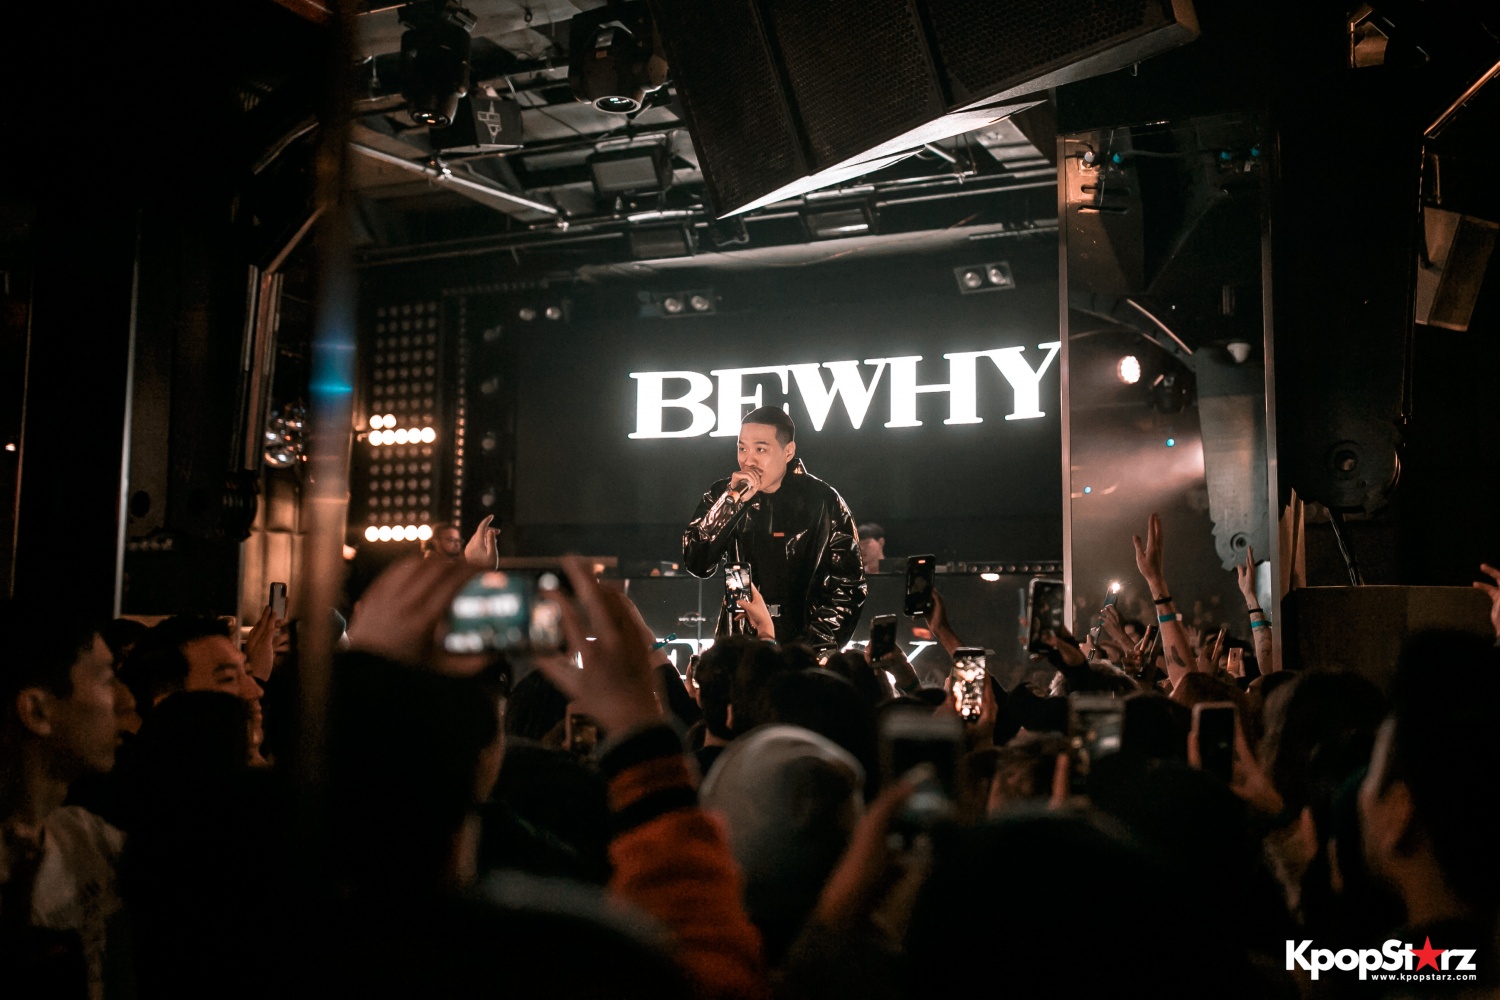 BewhY Conquers New York in Final “The Movie Star” 2020 Tour Stop